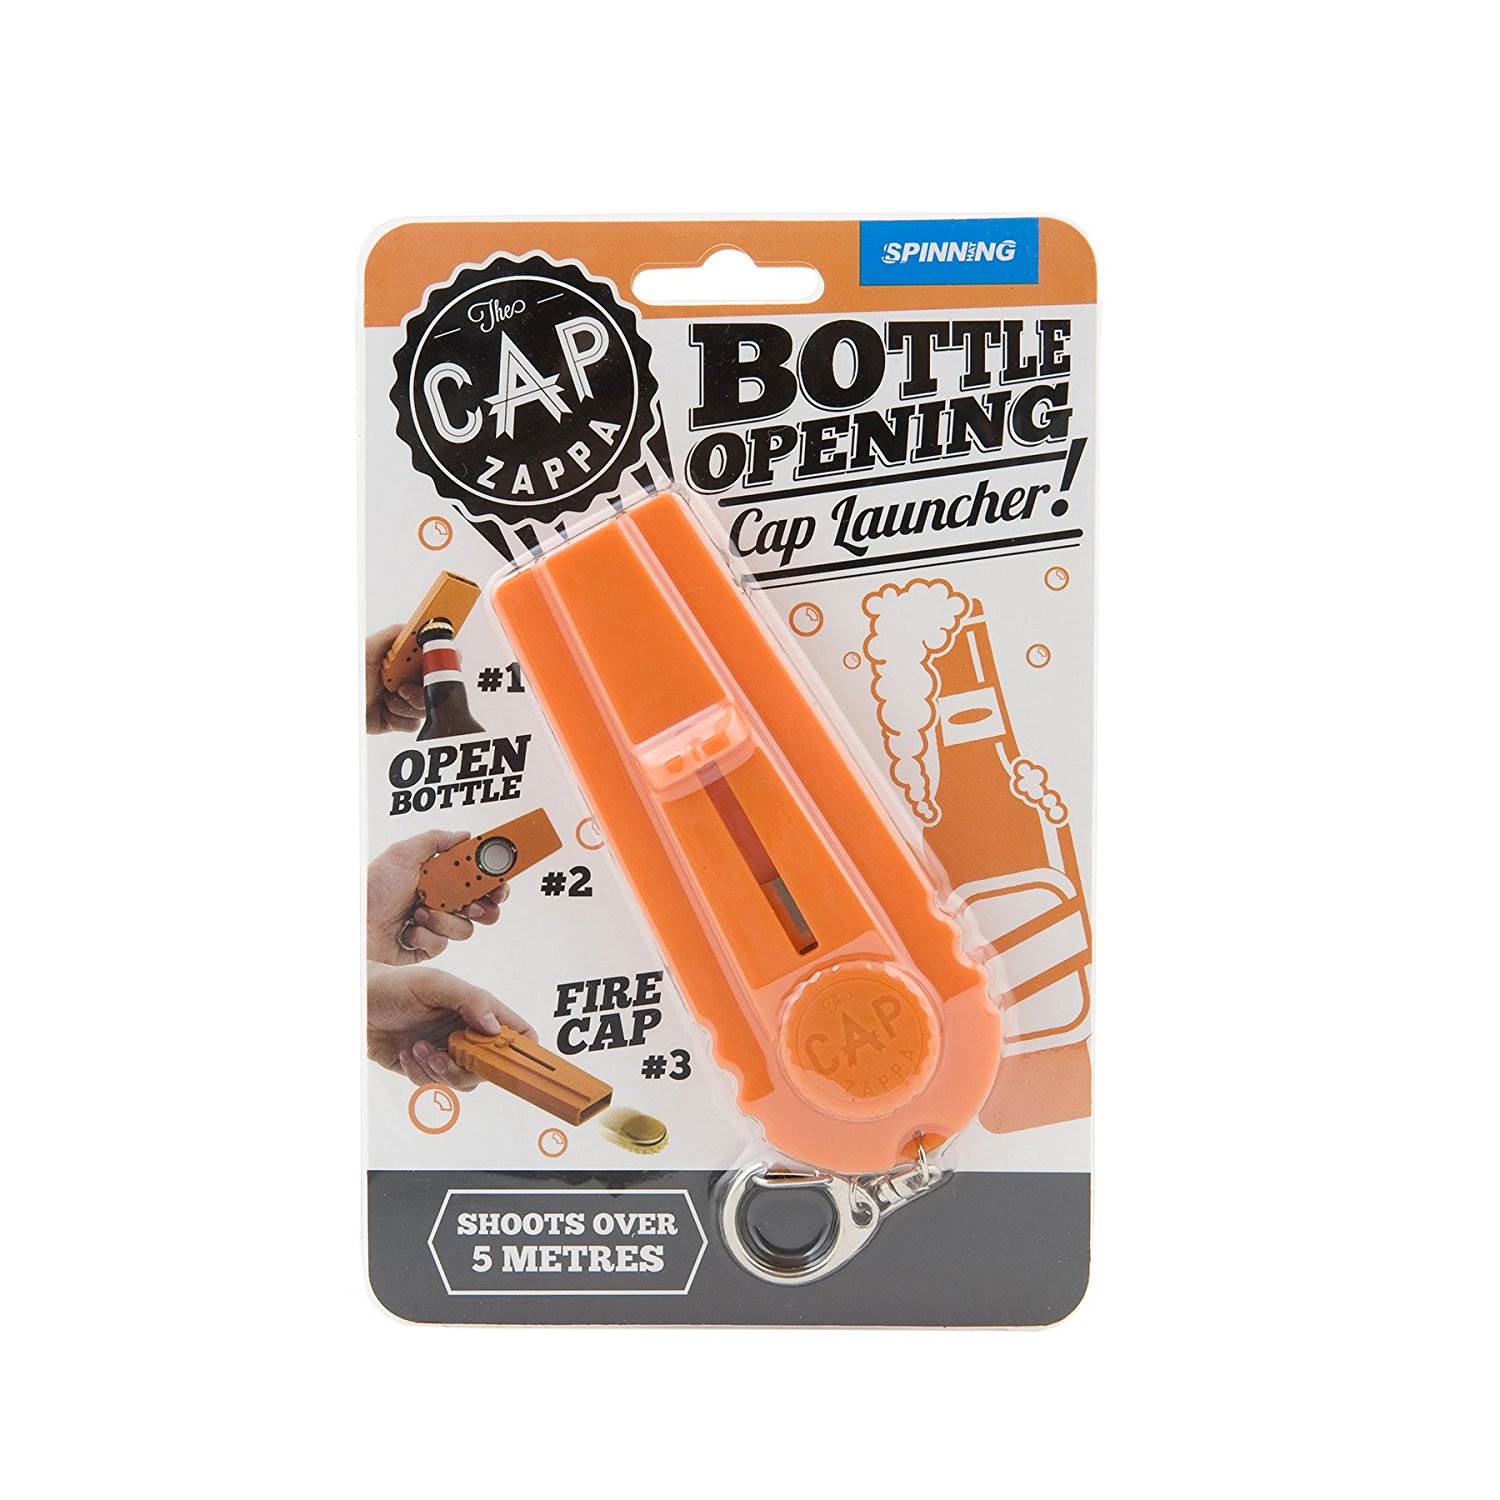 Now you can put someones eye out with a bottle cap using this bottle opening cap launcher.  Get it <a href="https://amzn.to/2KRETvB" target="_blank"><font color="red"><b>HERE</font></b></a>